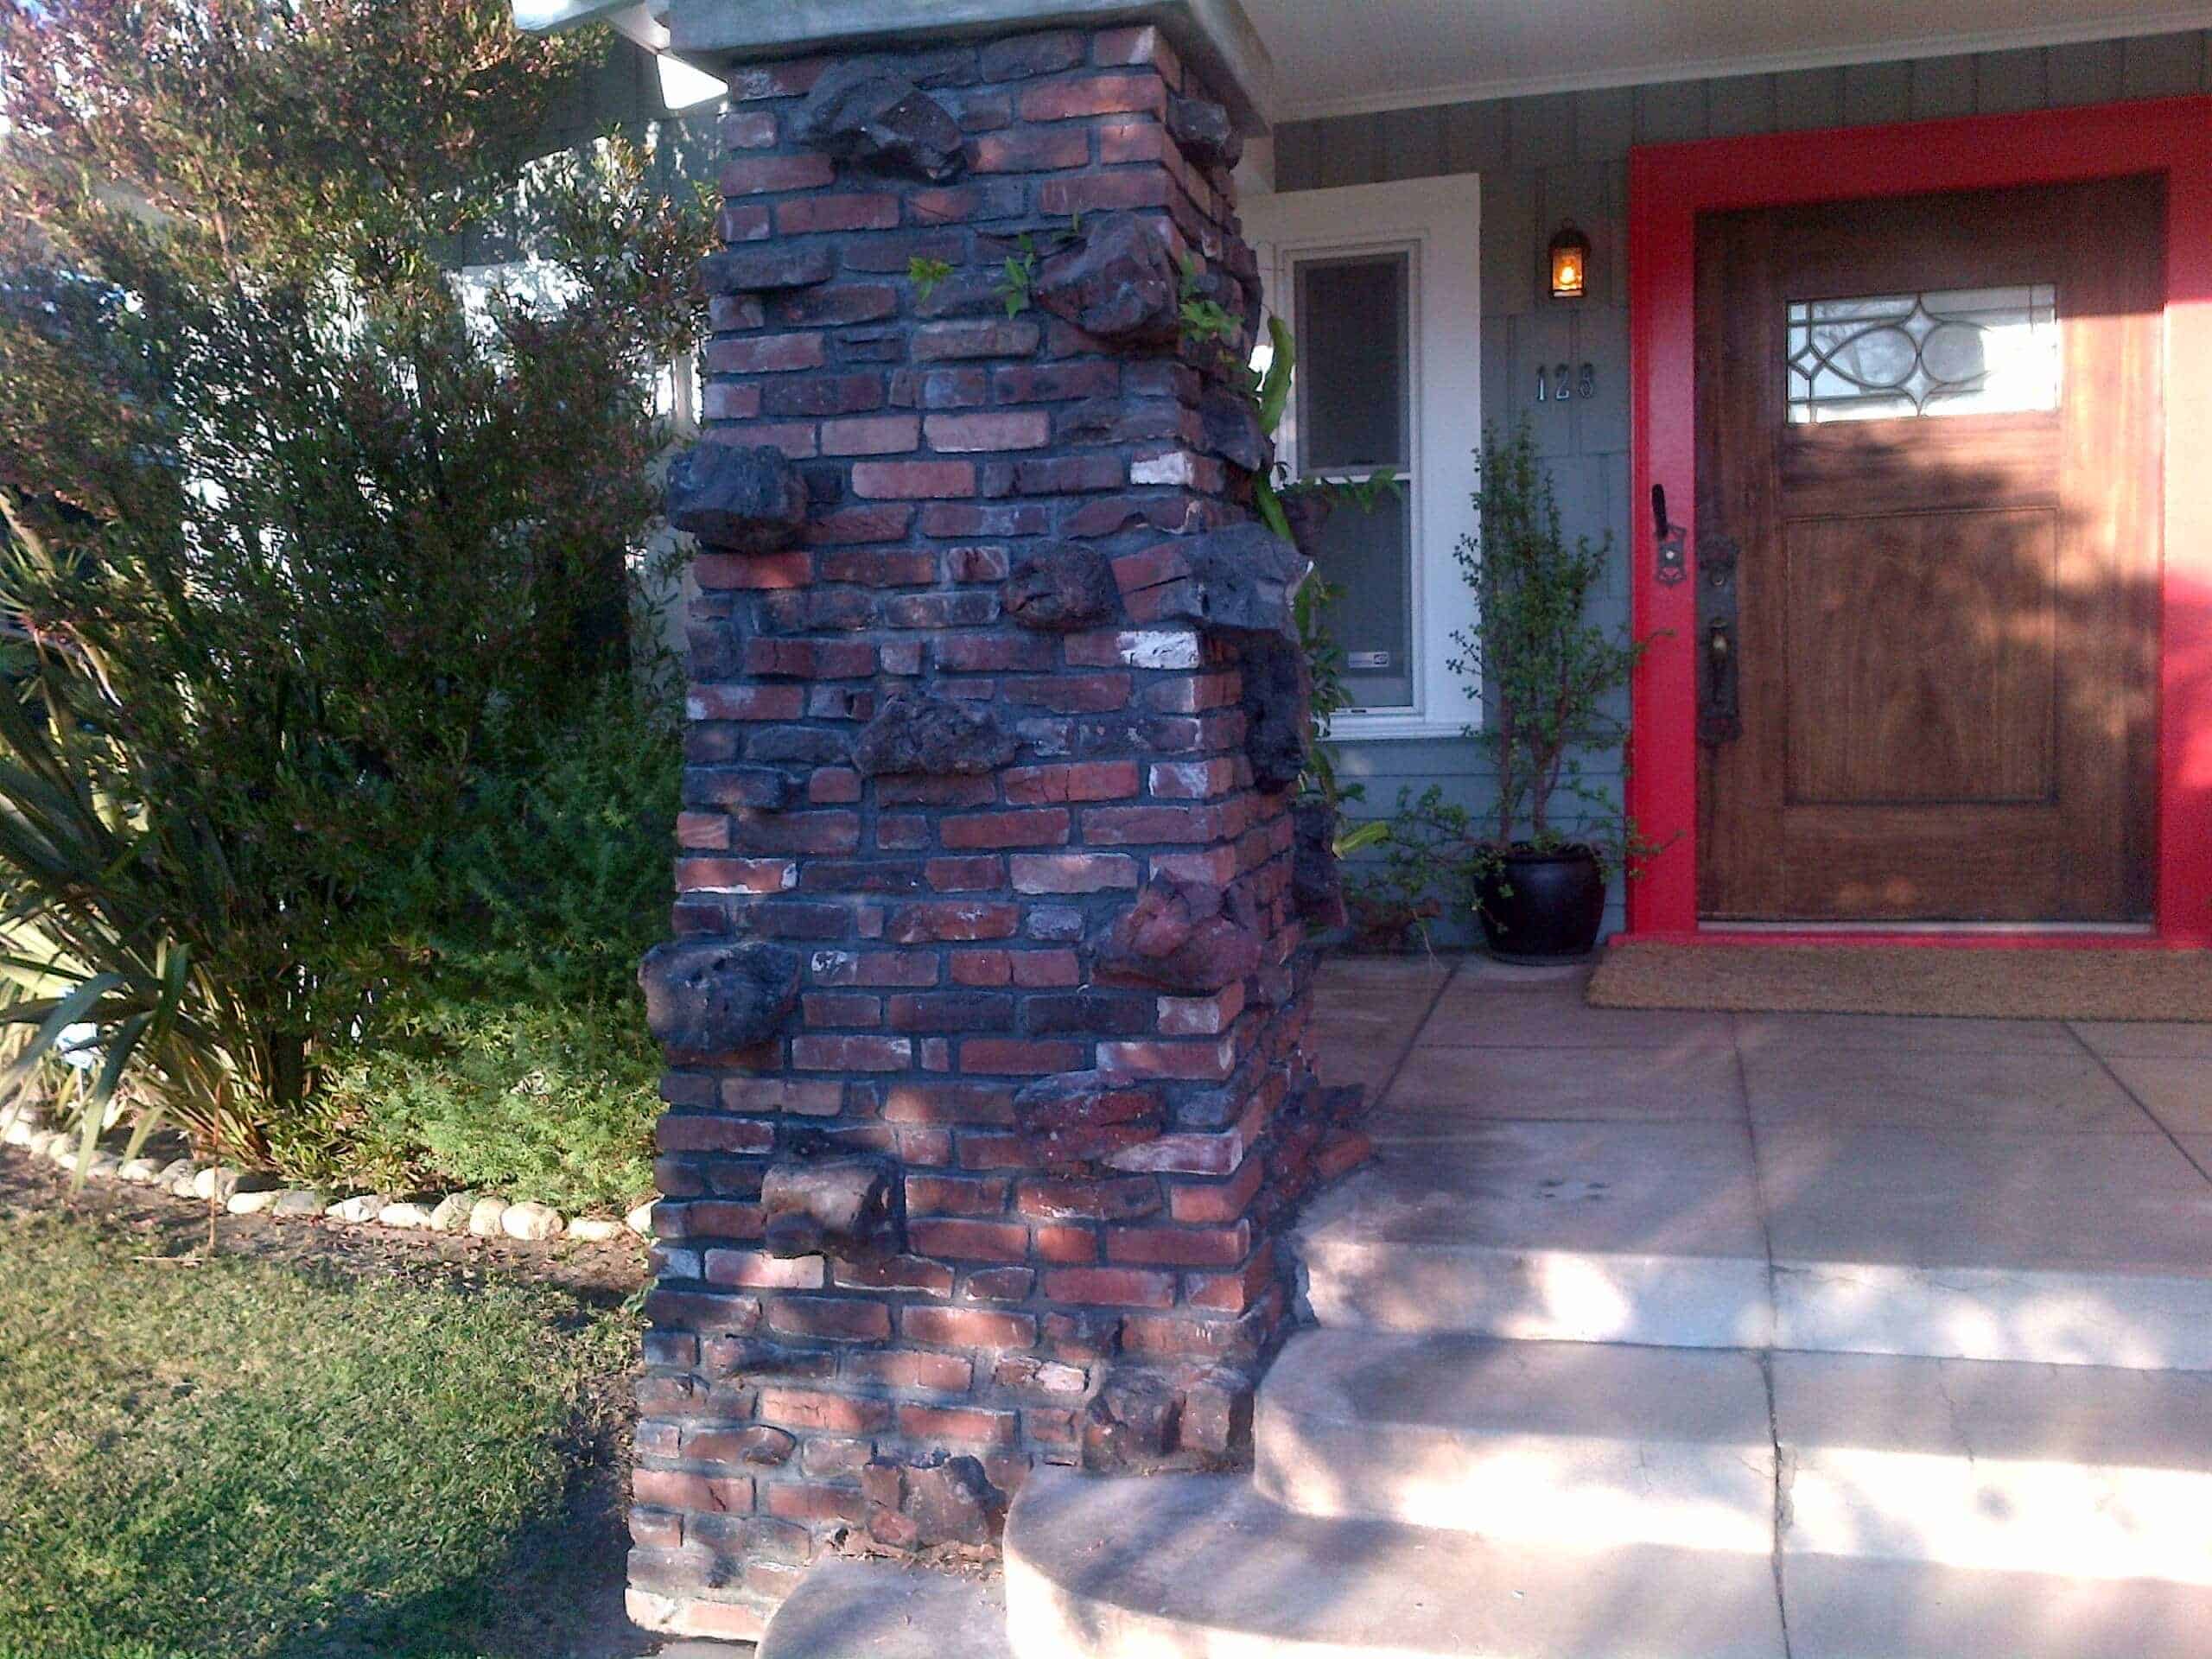 Use clinker bricks for interesting structures - The Washington Post